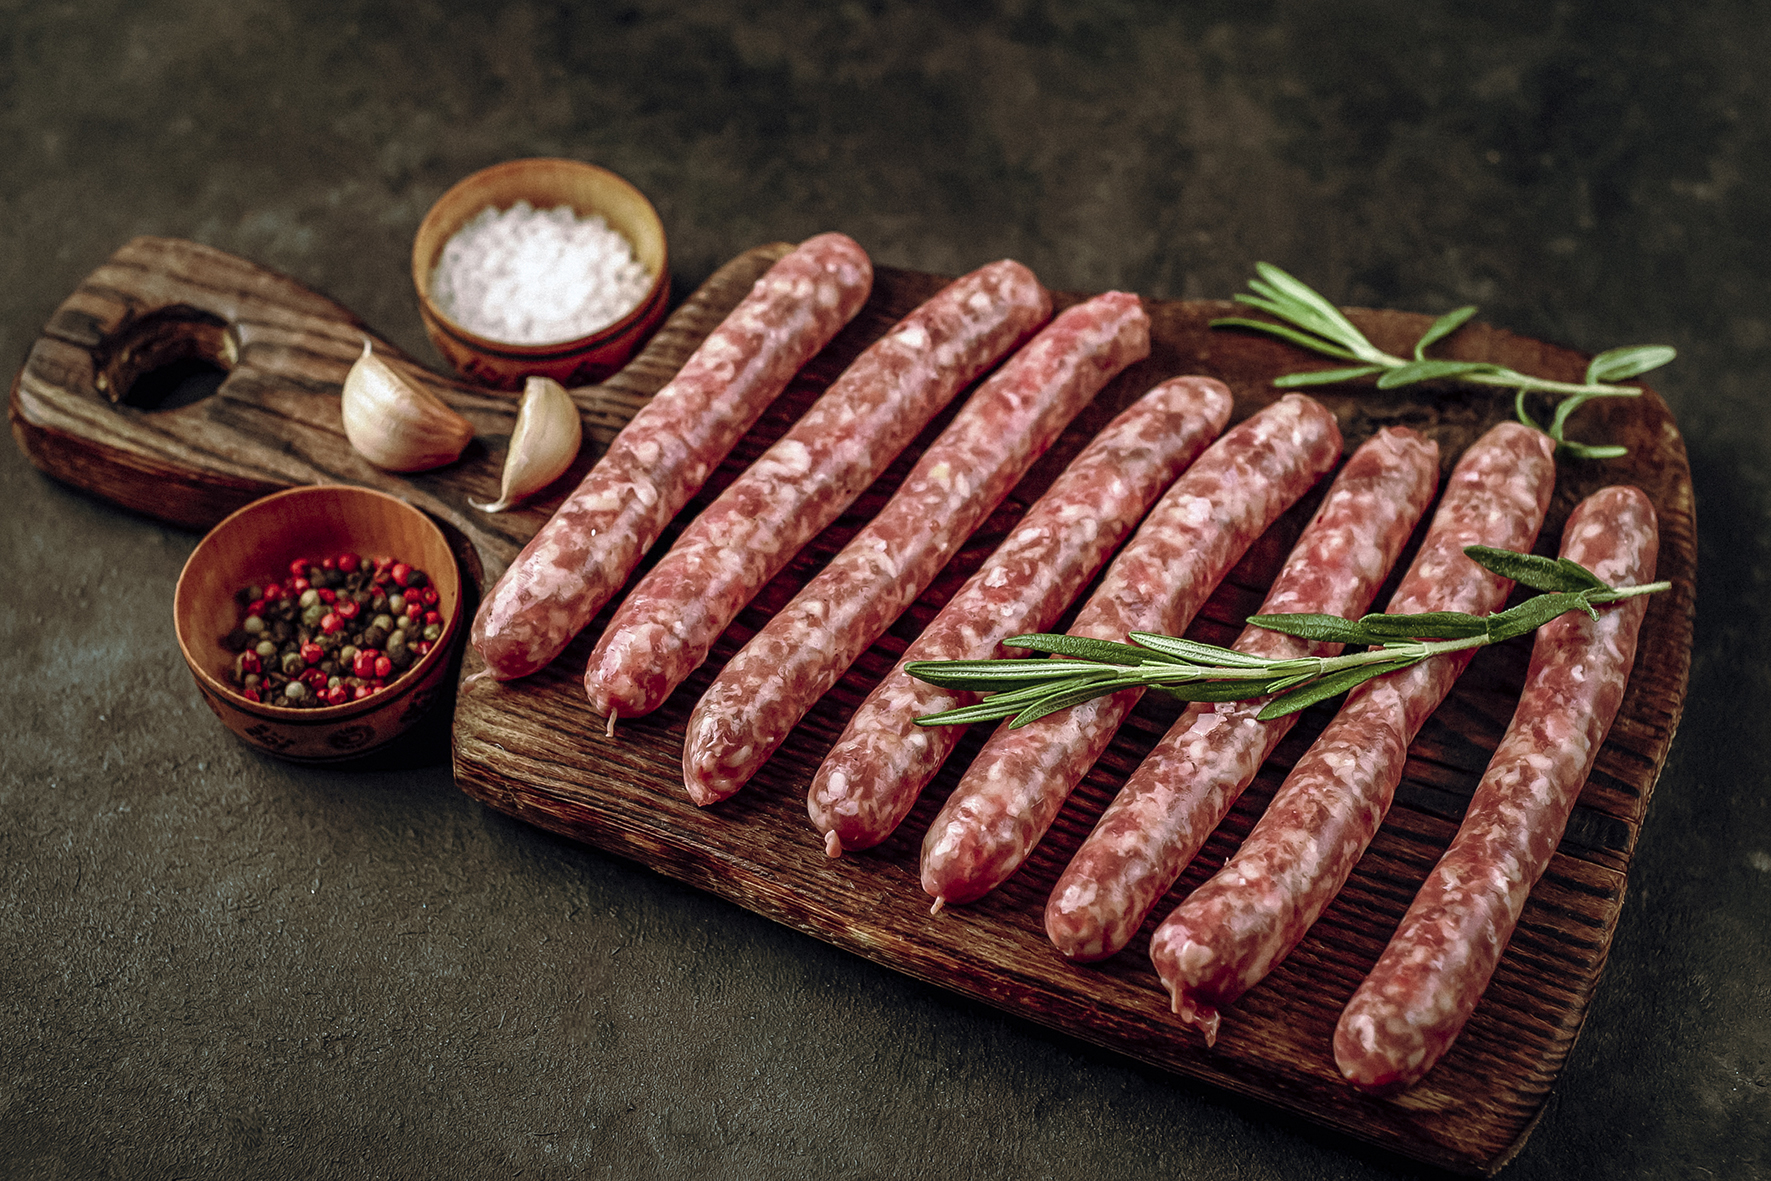 Raw,Sausages,With,Ingredients,On,A,Cutting,Board,On,A